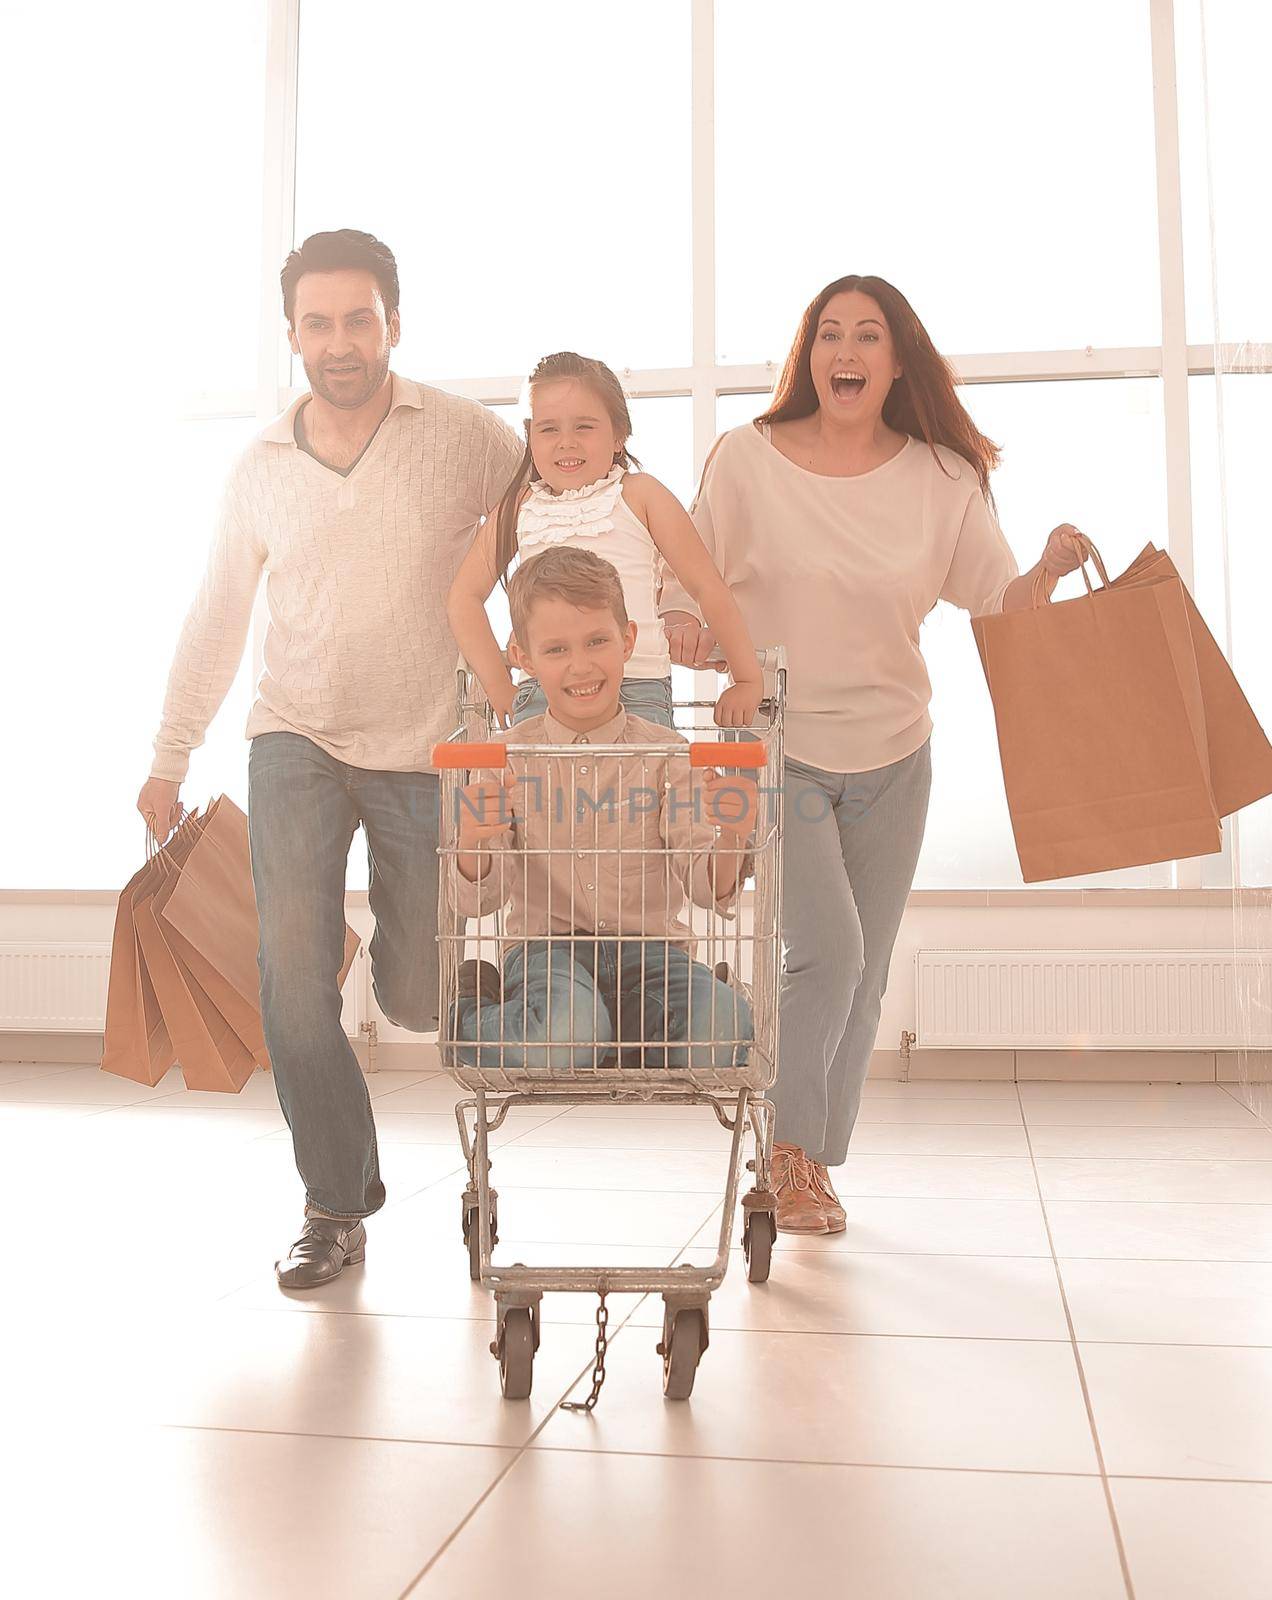 happy family in a hurry to shop.photo with copy space